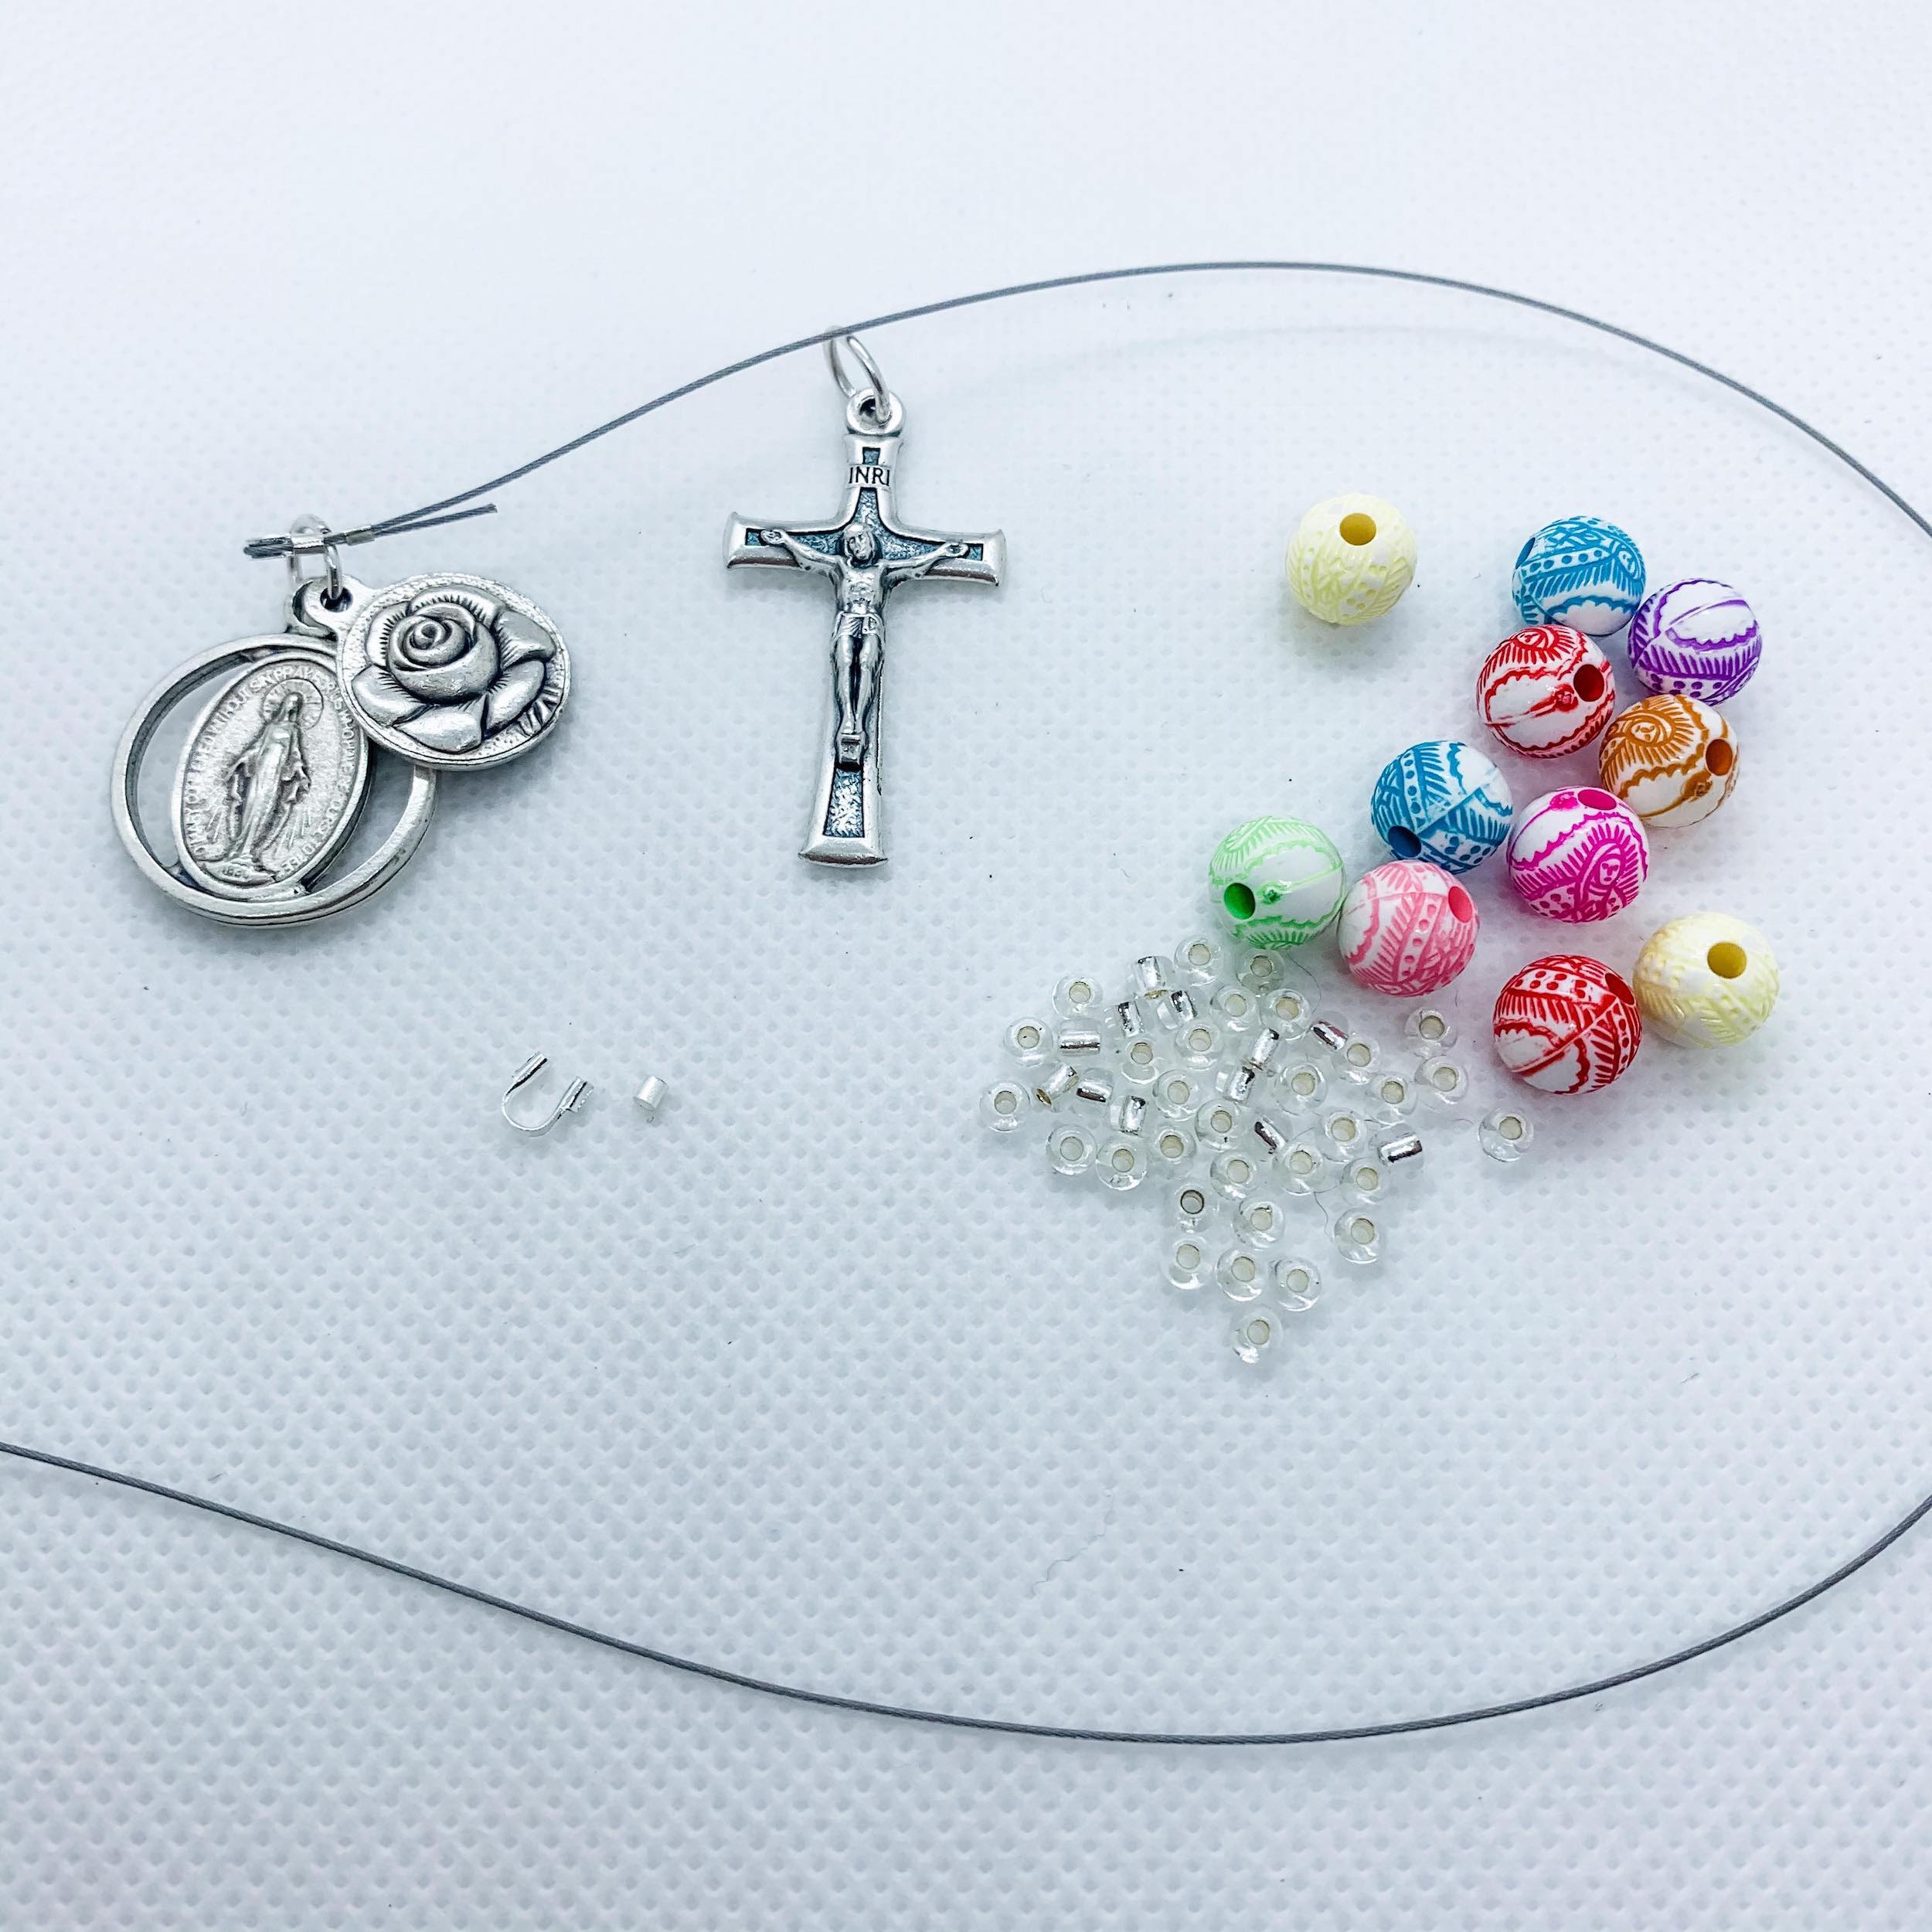 Rosary Supplies - Rosary Kits by Design My Rosary